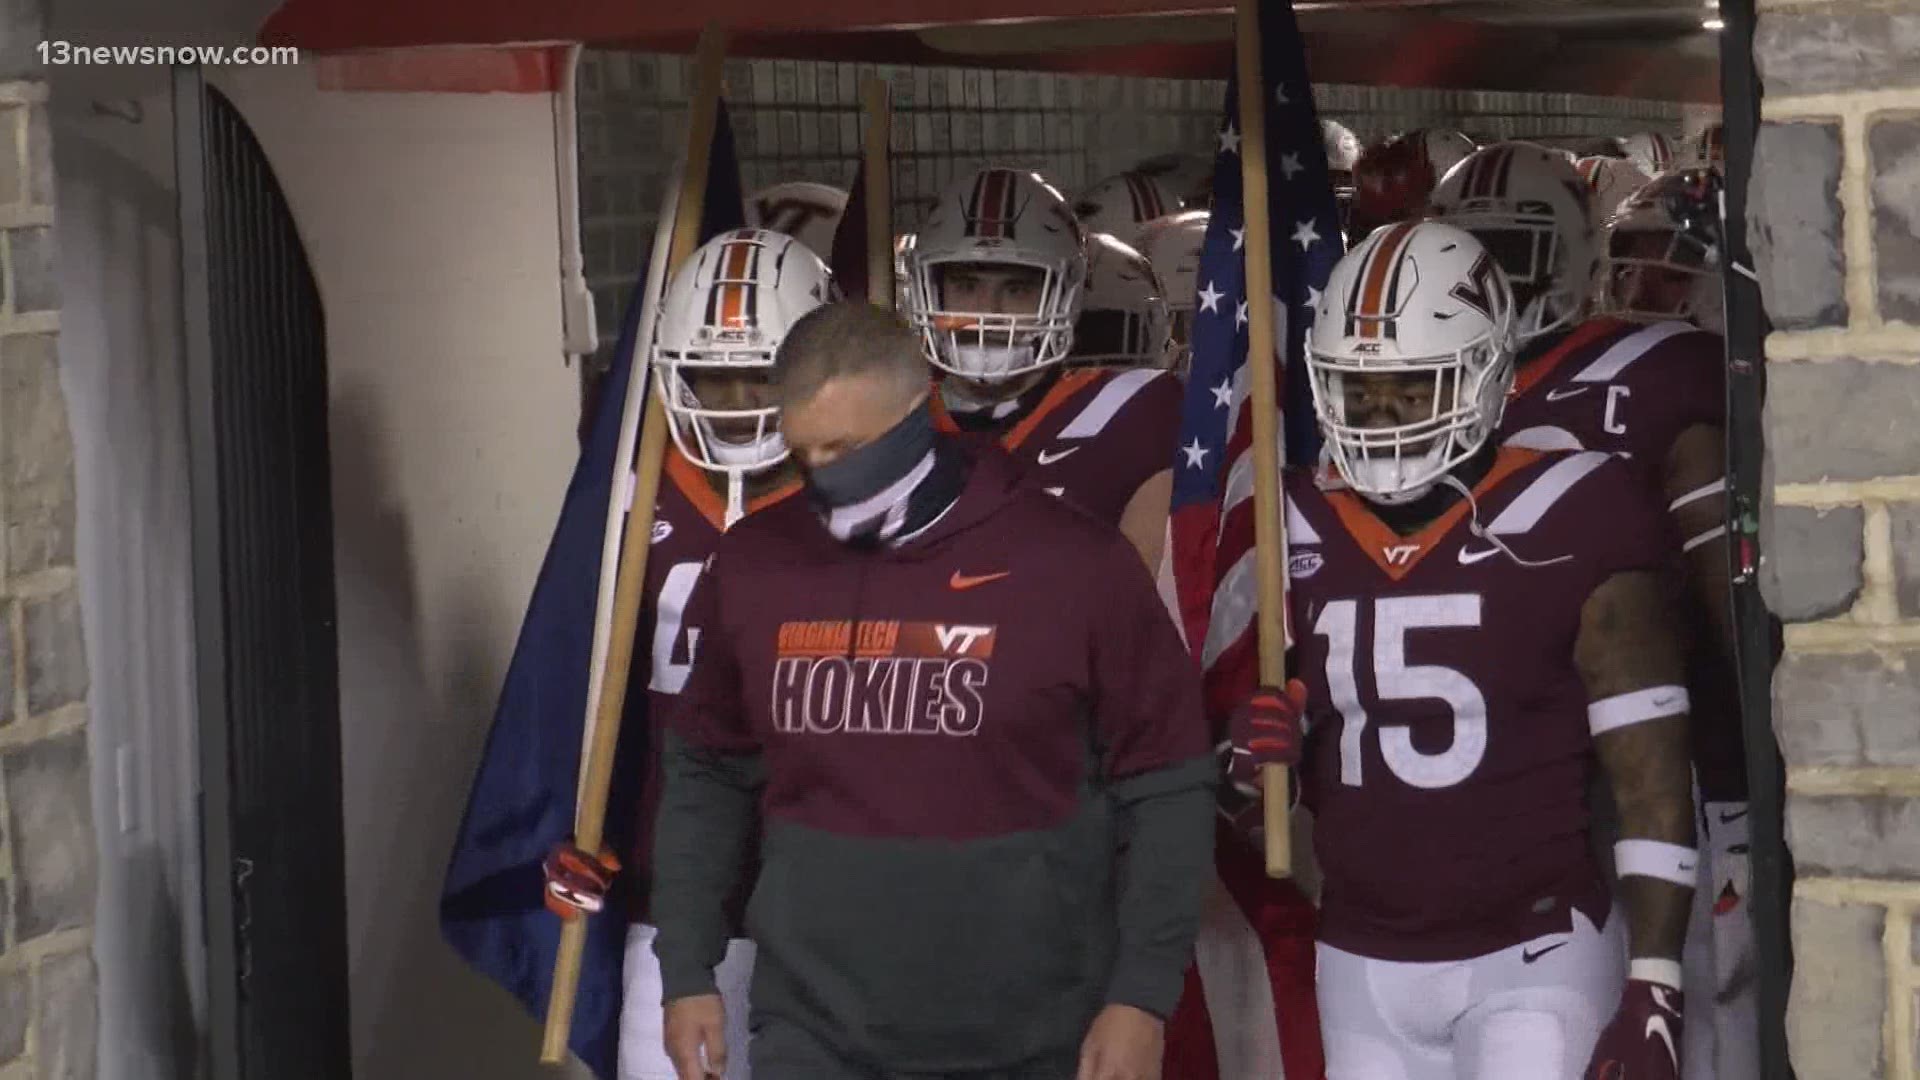 The Hokies will close out the regular season with a Commonwealth Clash game at Virginia on Nov. 27th.